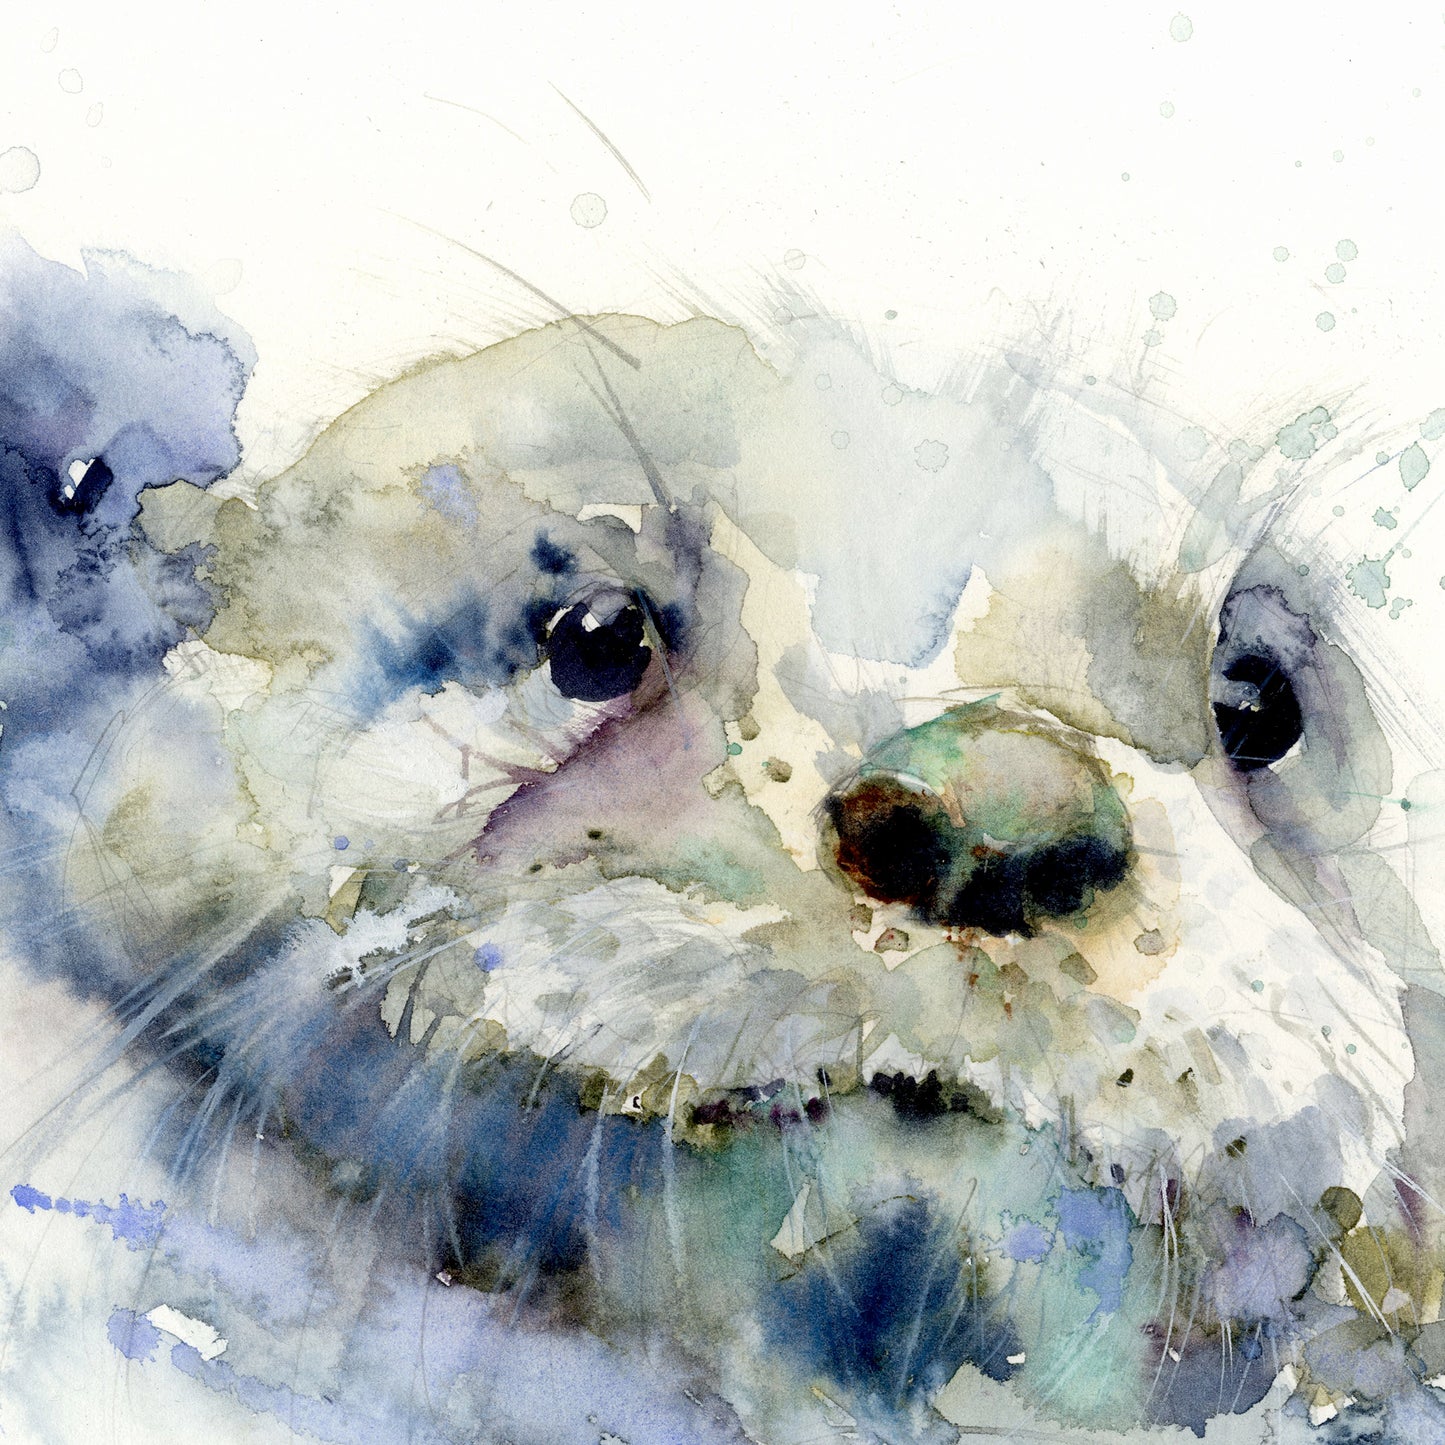 Signed LIMITED EDITION PRINT of  original OTTER  painting "Henry"   - Jen Buckley Art limited edition animal art prints